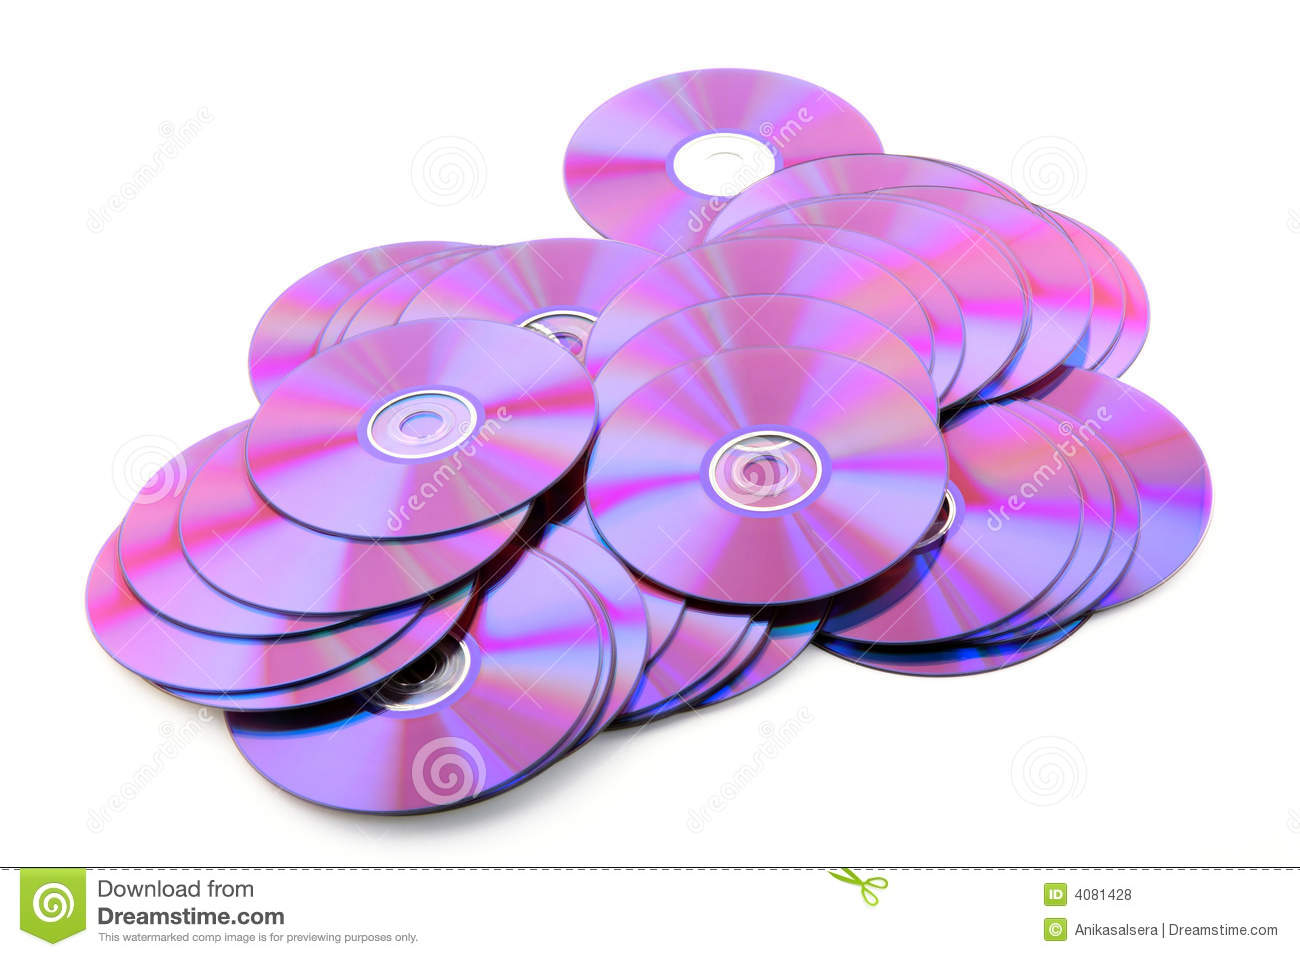 Pile Of Colorful Dvds Or Cds On White Background Royalty Free Stock